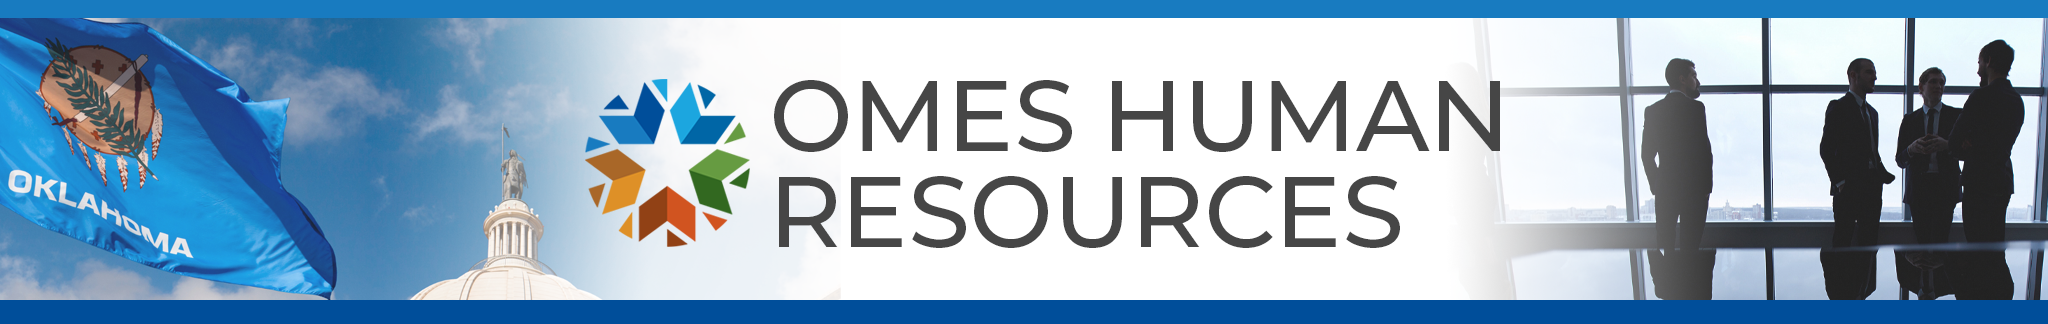 OMES Human Resources